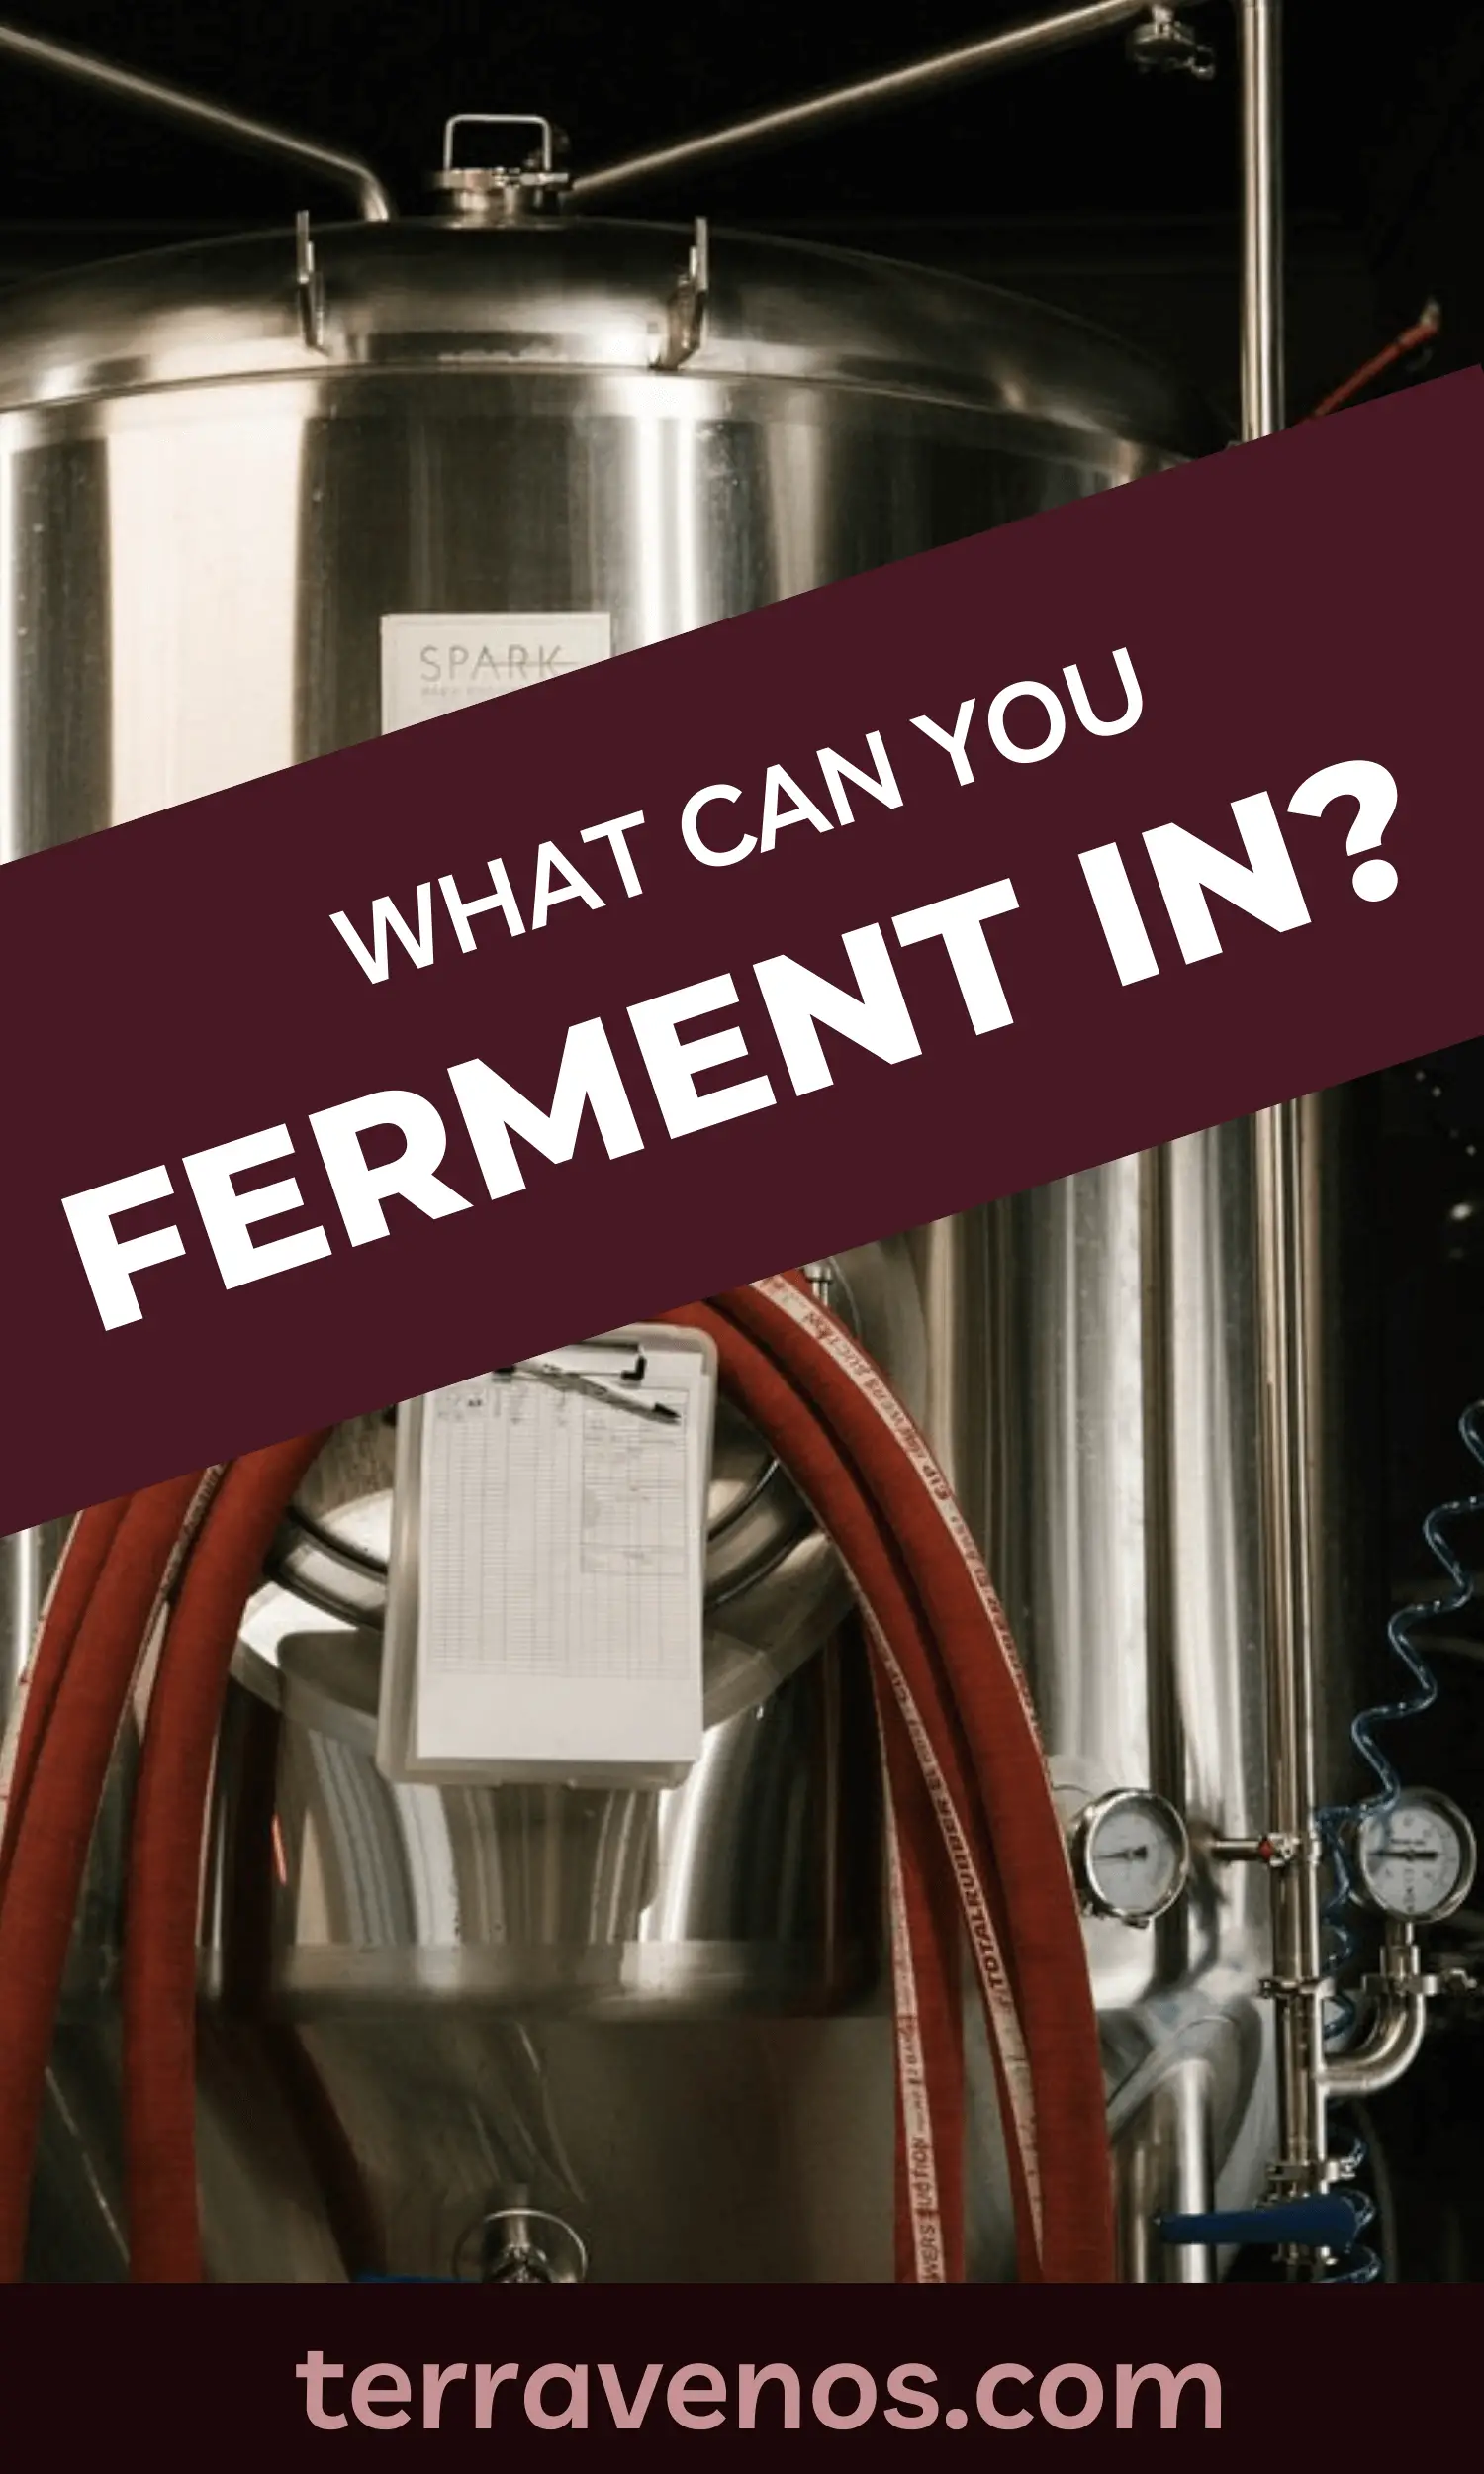 what can you ferment wine in?